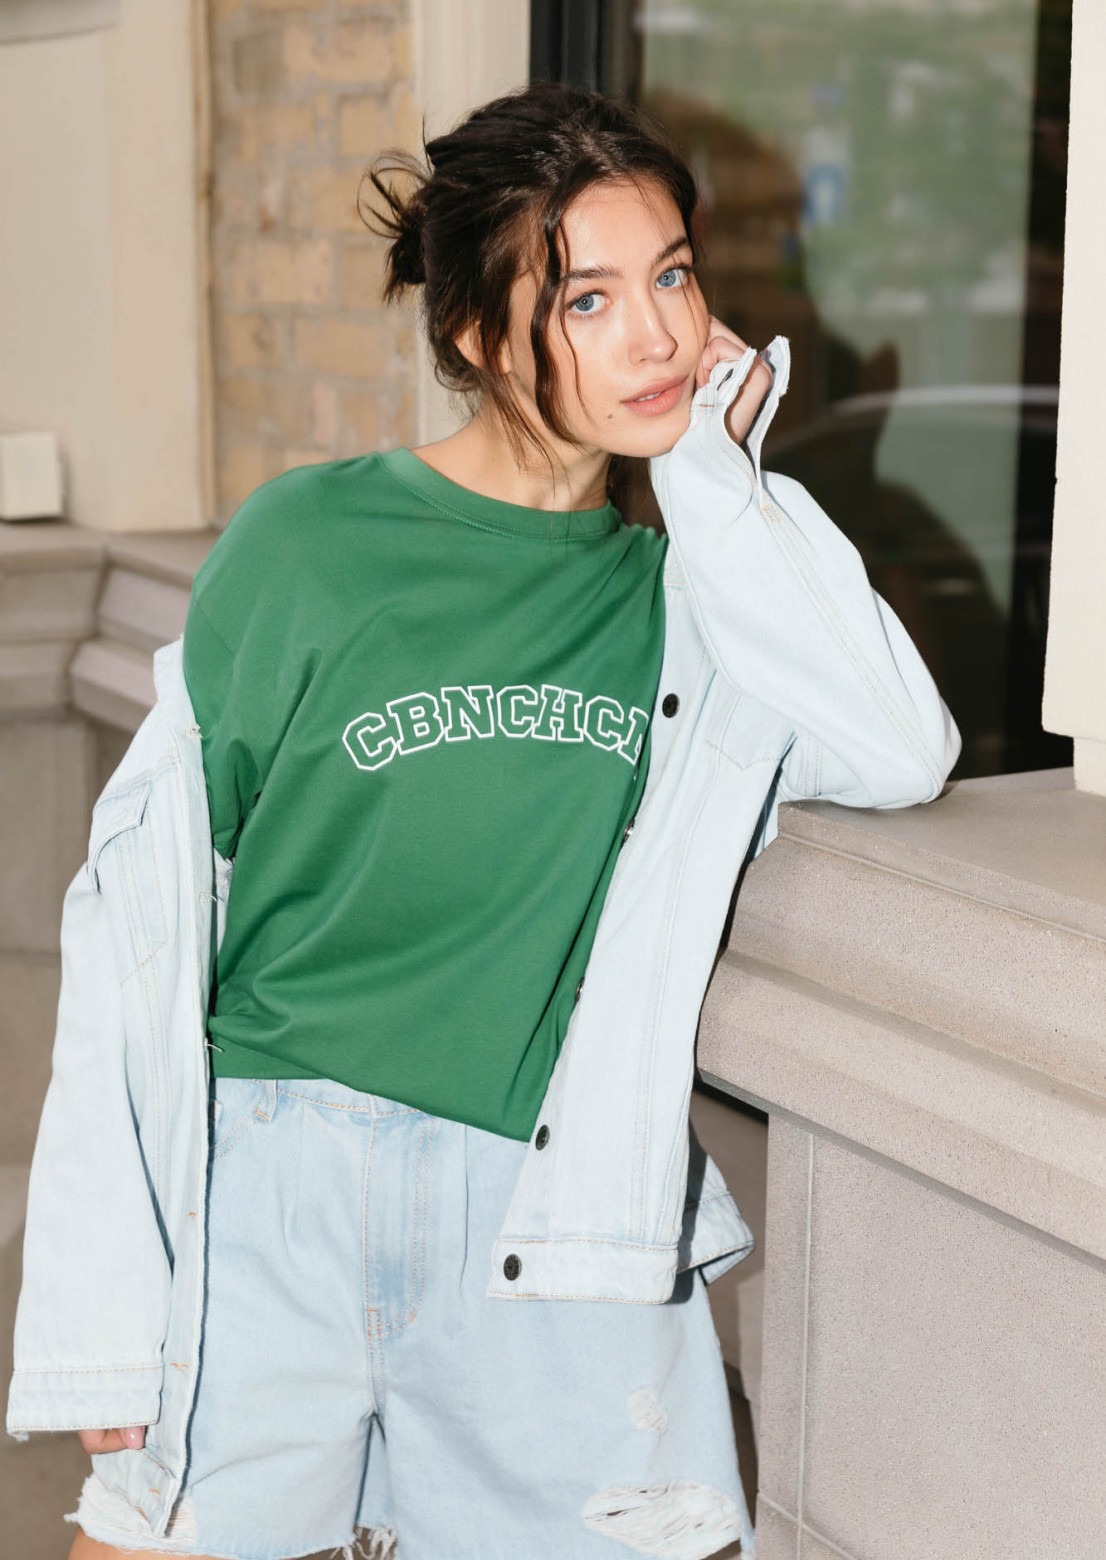 Green color T-shirt with a print "CBNCHCM"